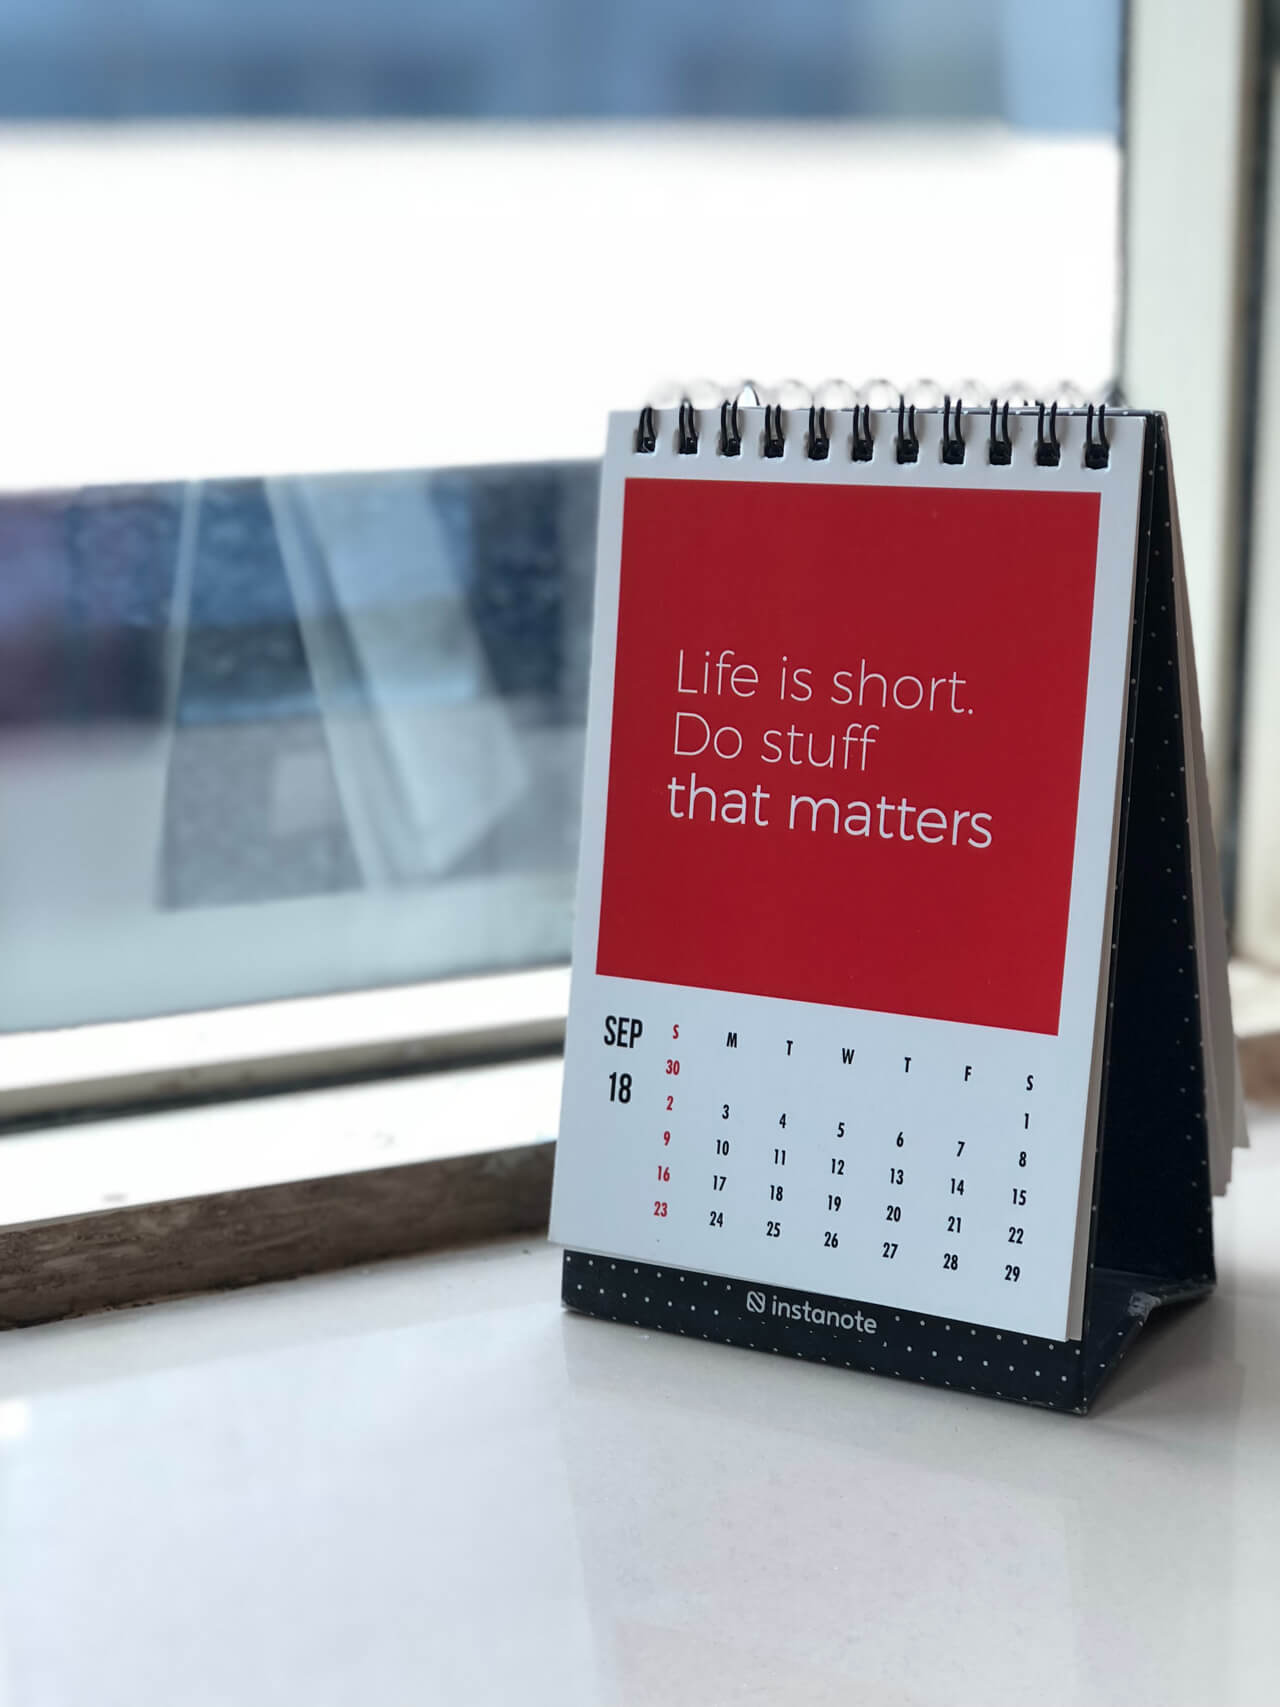 A red desk calendar that says "Life is short, Do stuff that matters"